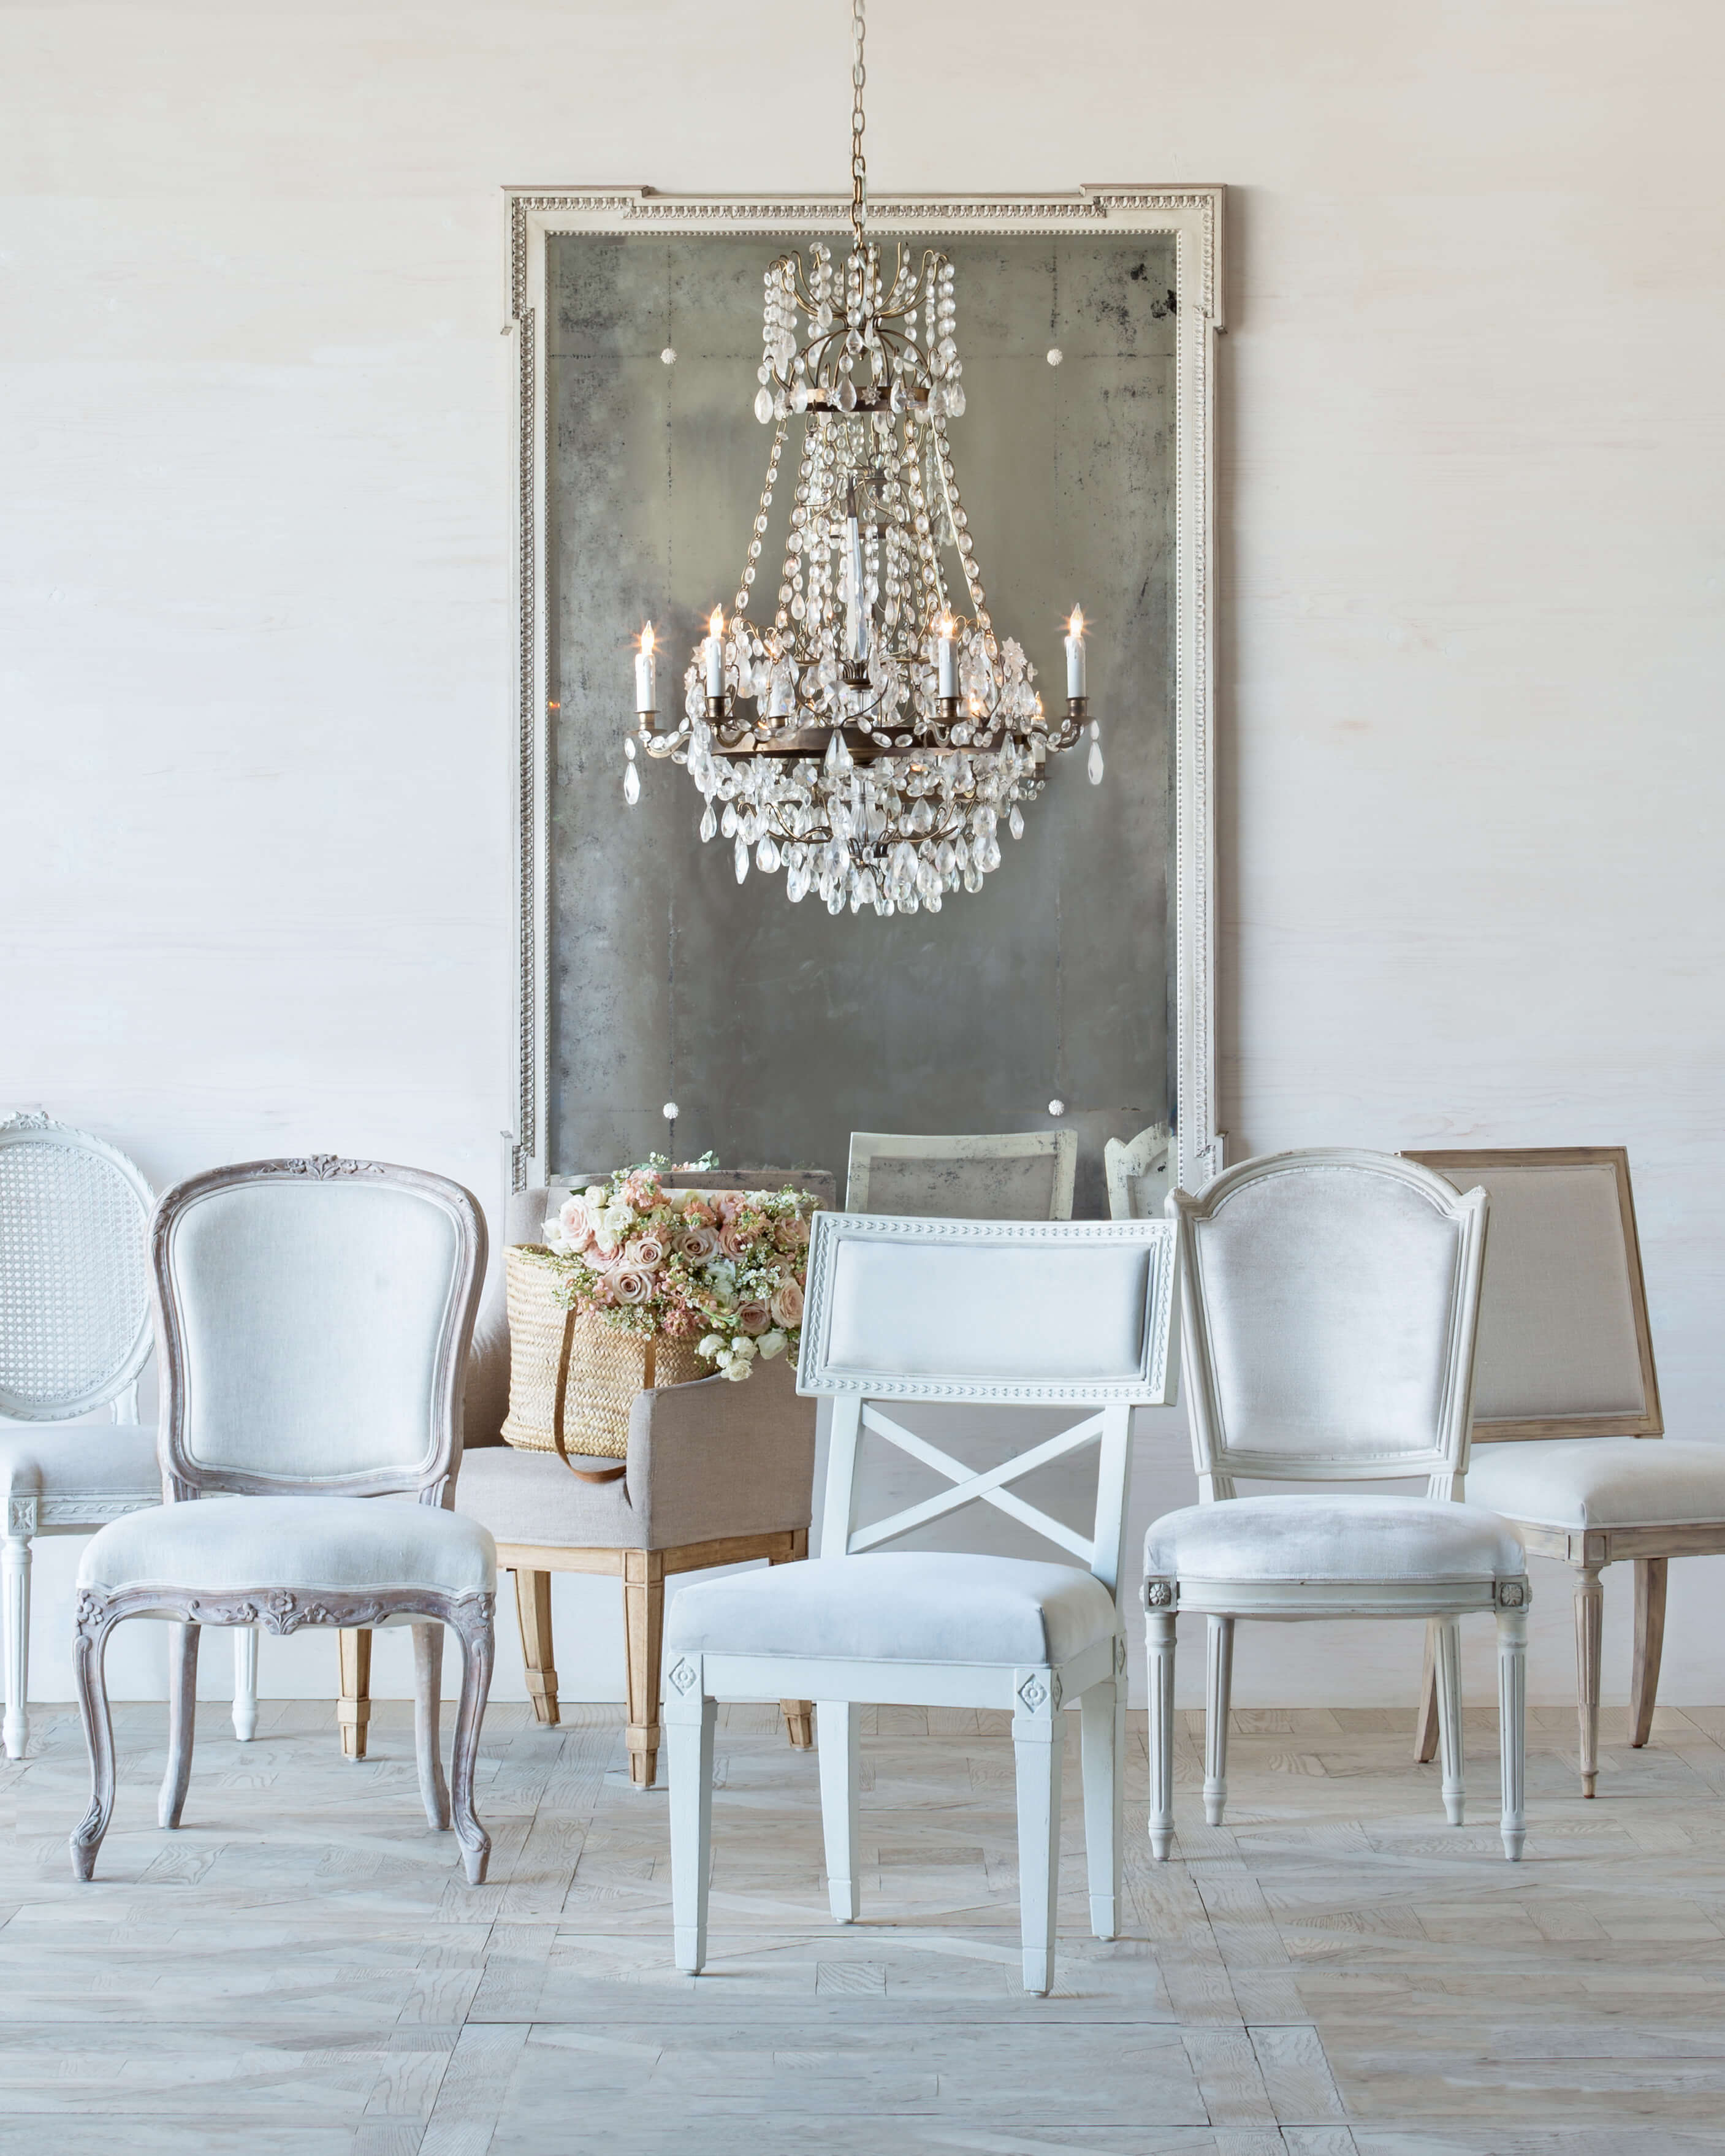 Eloquence® Louis Cane Dining Chair in Fog Linen and Antique White Finish